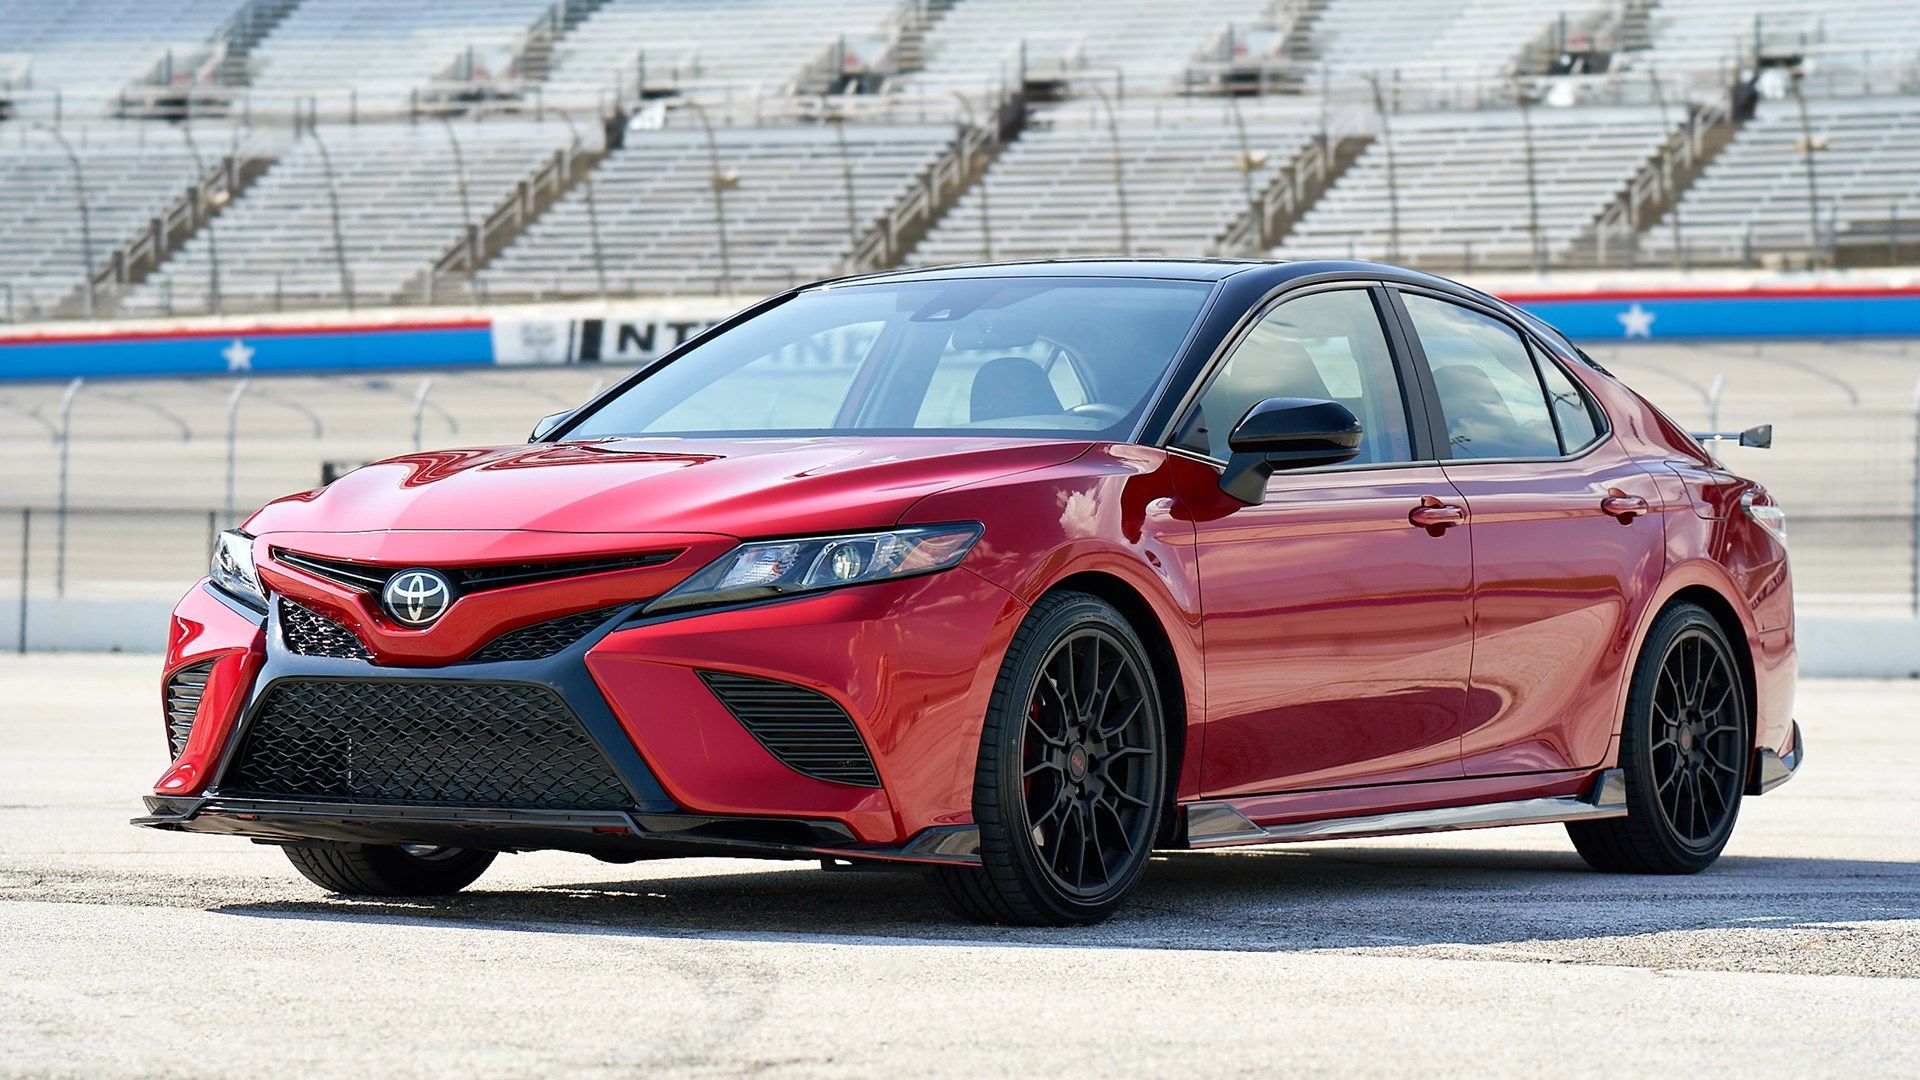 Toyota Prices 2020 Camry, Now With More TRD